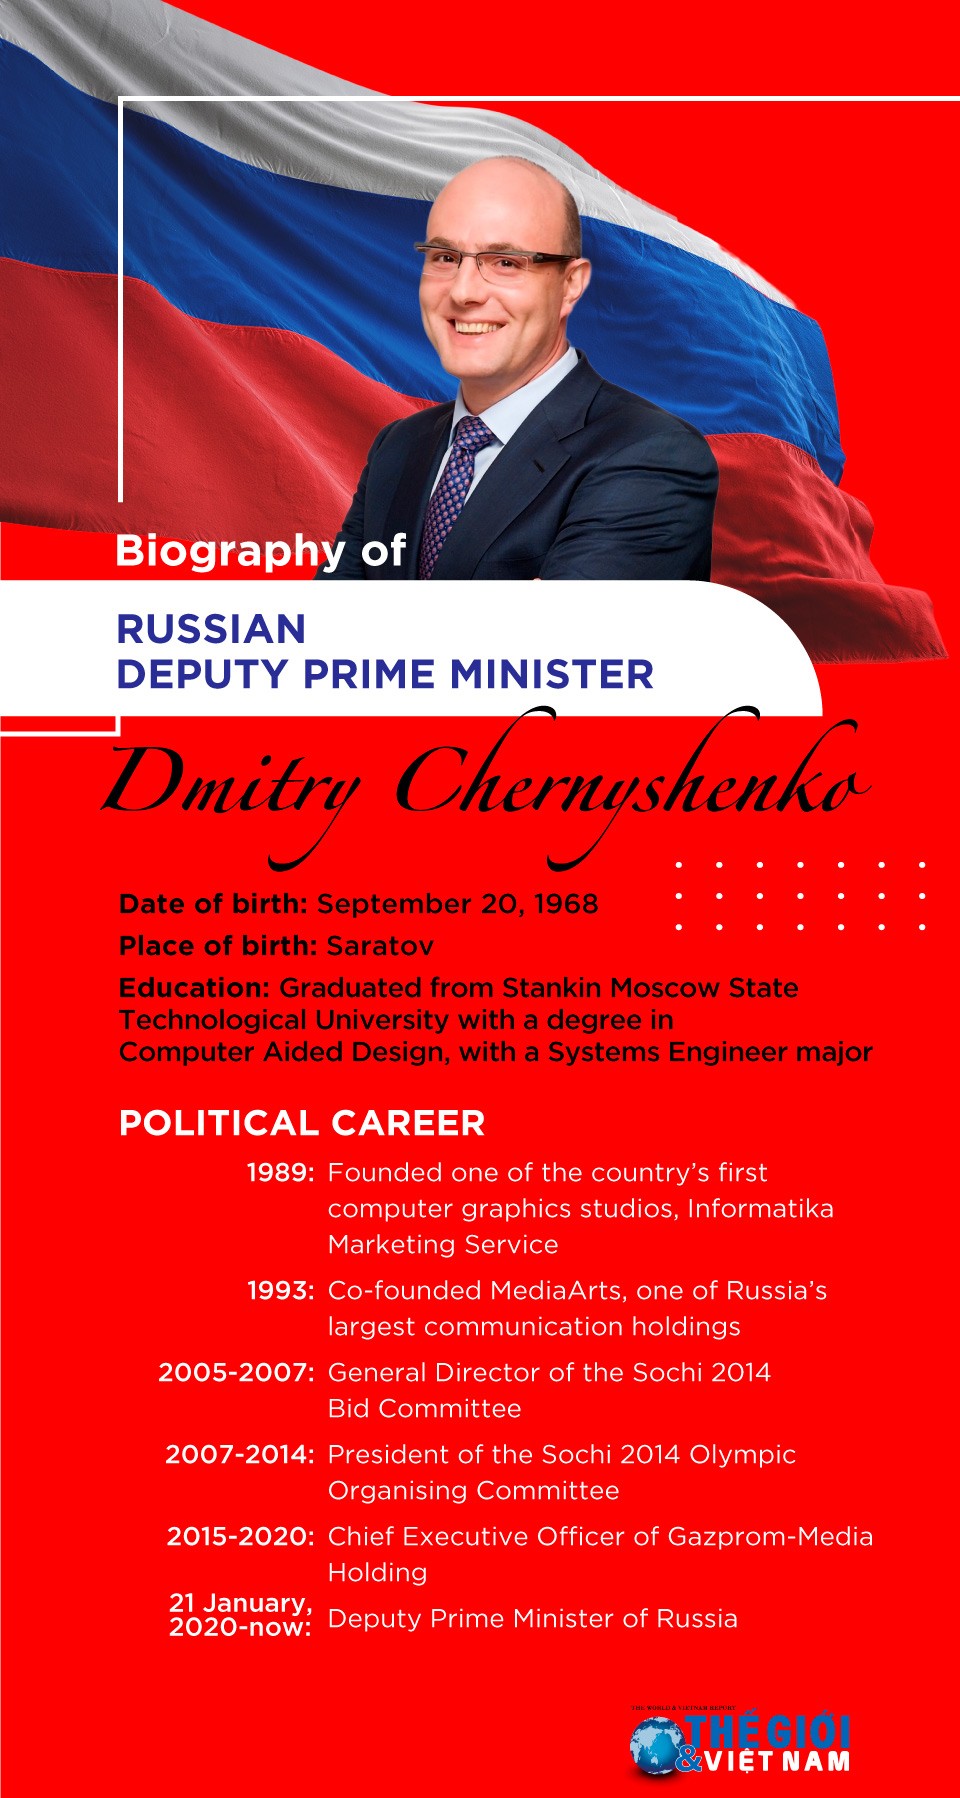 Biography of Russian Deputy Prime Minister